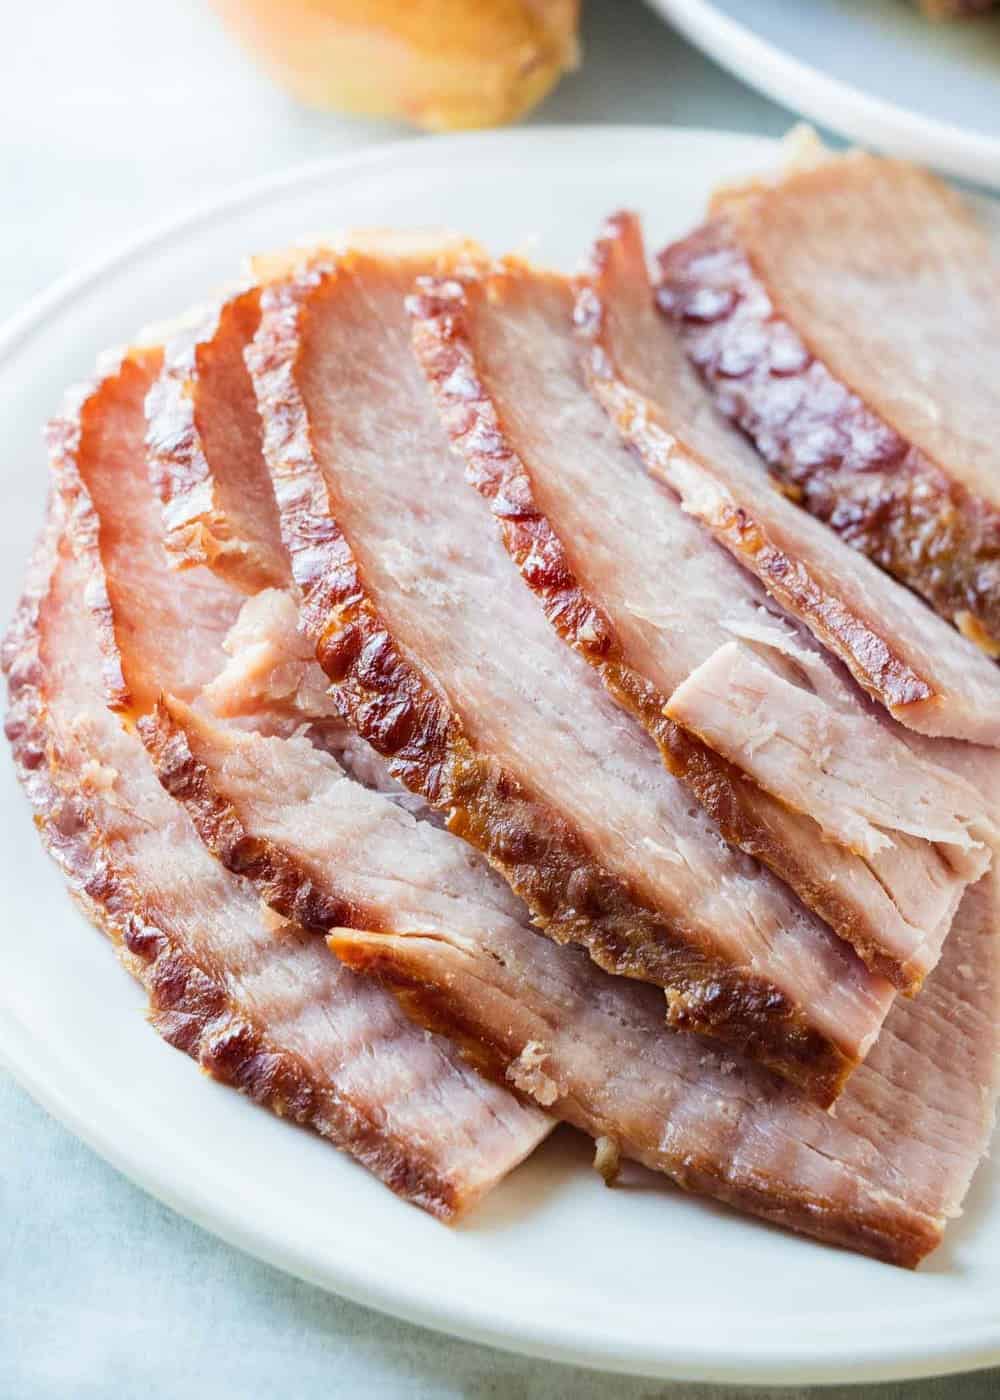 Slices of spiral ham on a white plate.